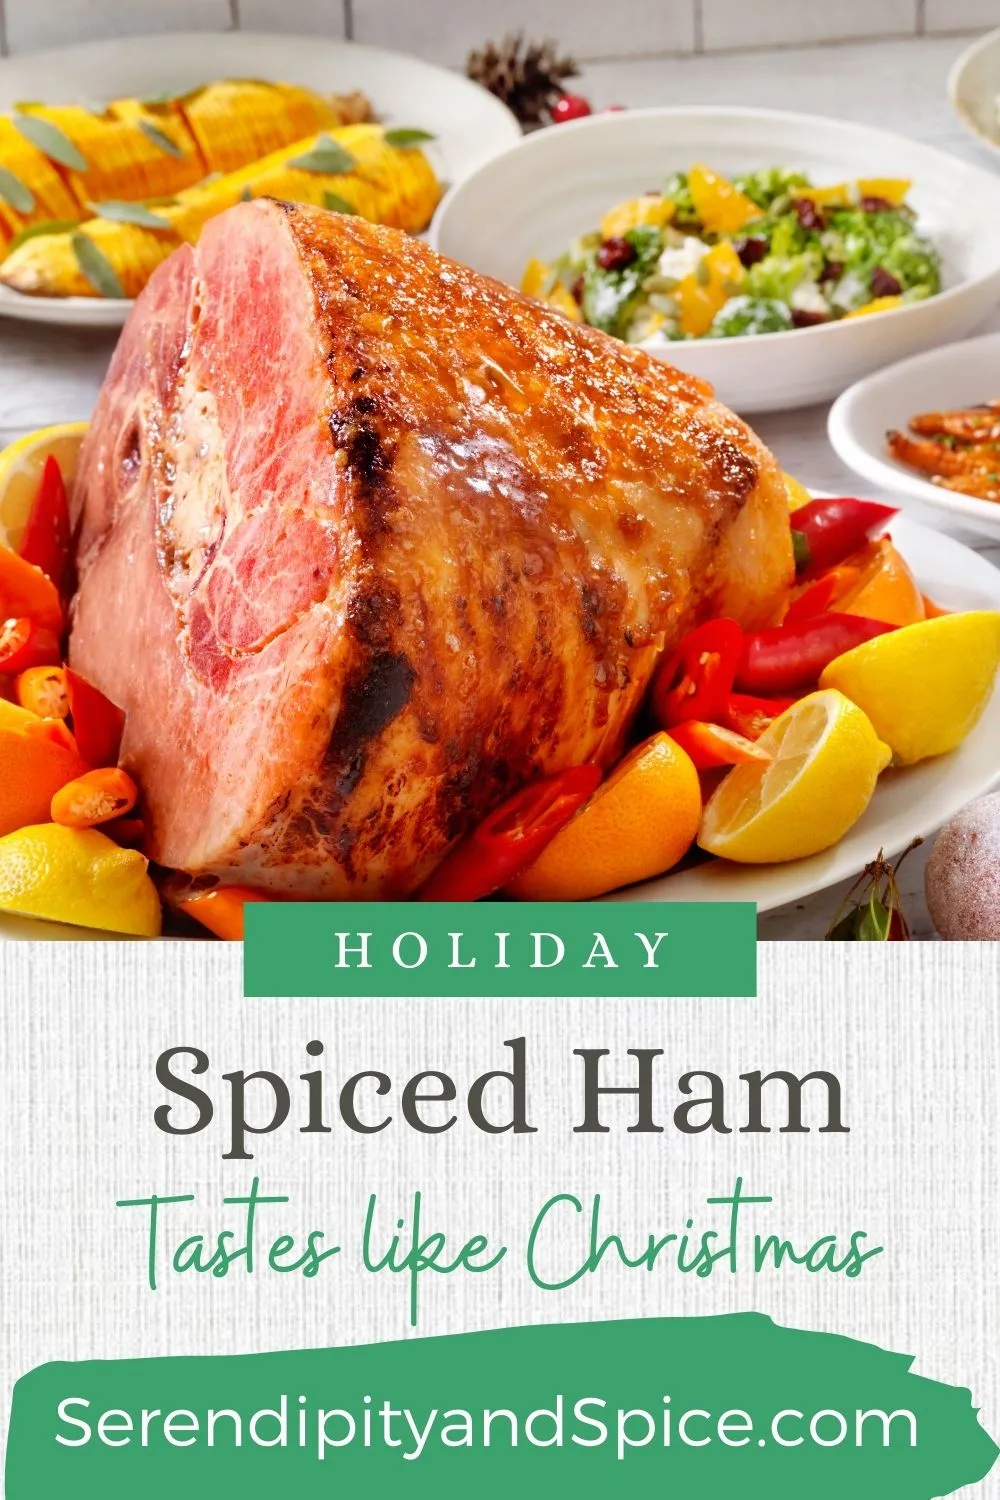 spiced ham Holiday Spiced Glazed Ham Recipe This Holiday Spiced Glazed Ham Recipe is so simple to make and tastes just like Christmas! It's the perfect blend of citrus, spices, and sweetness.